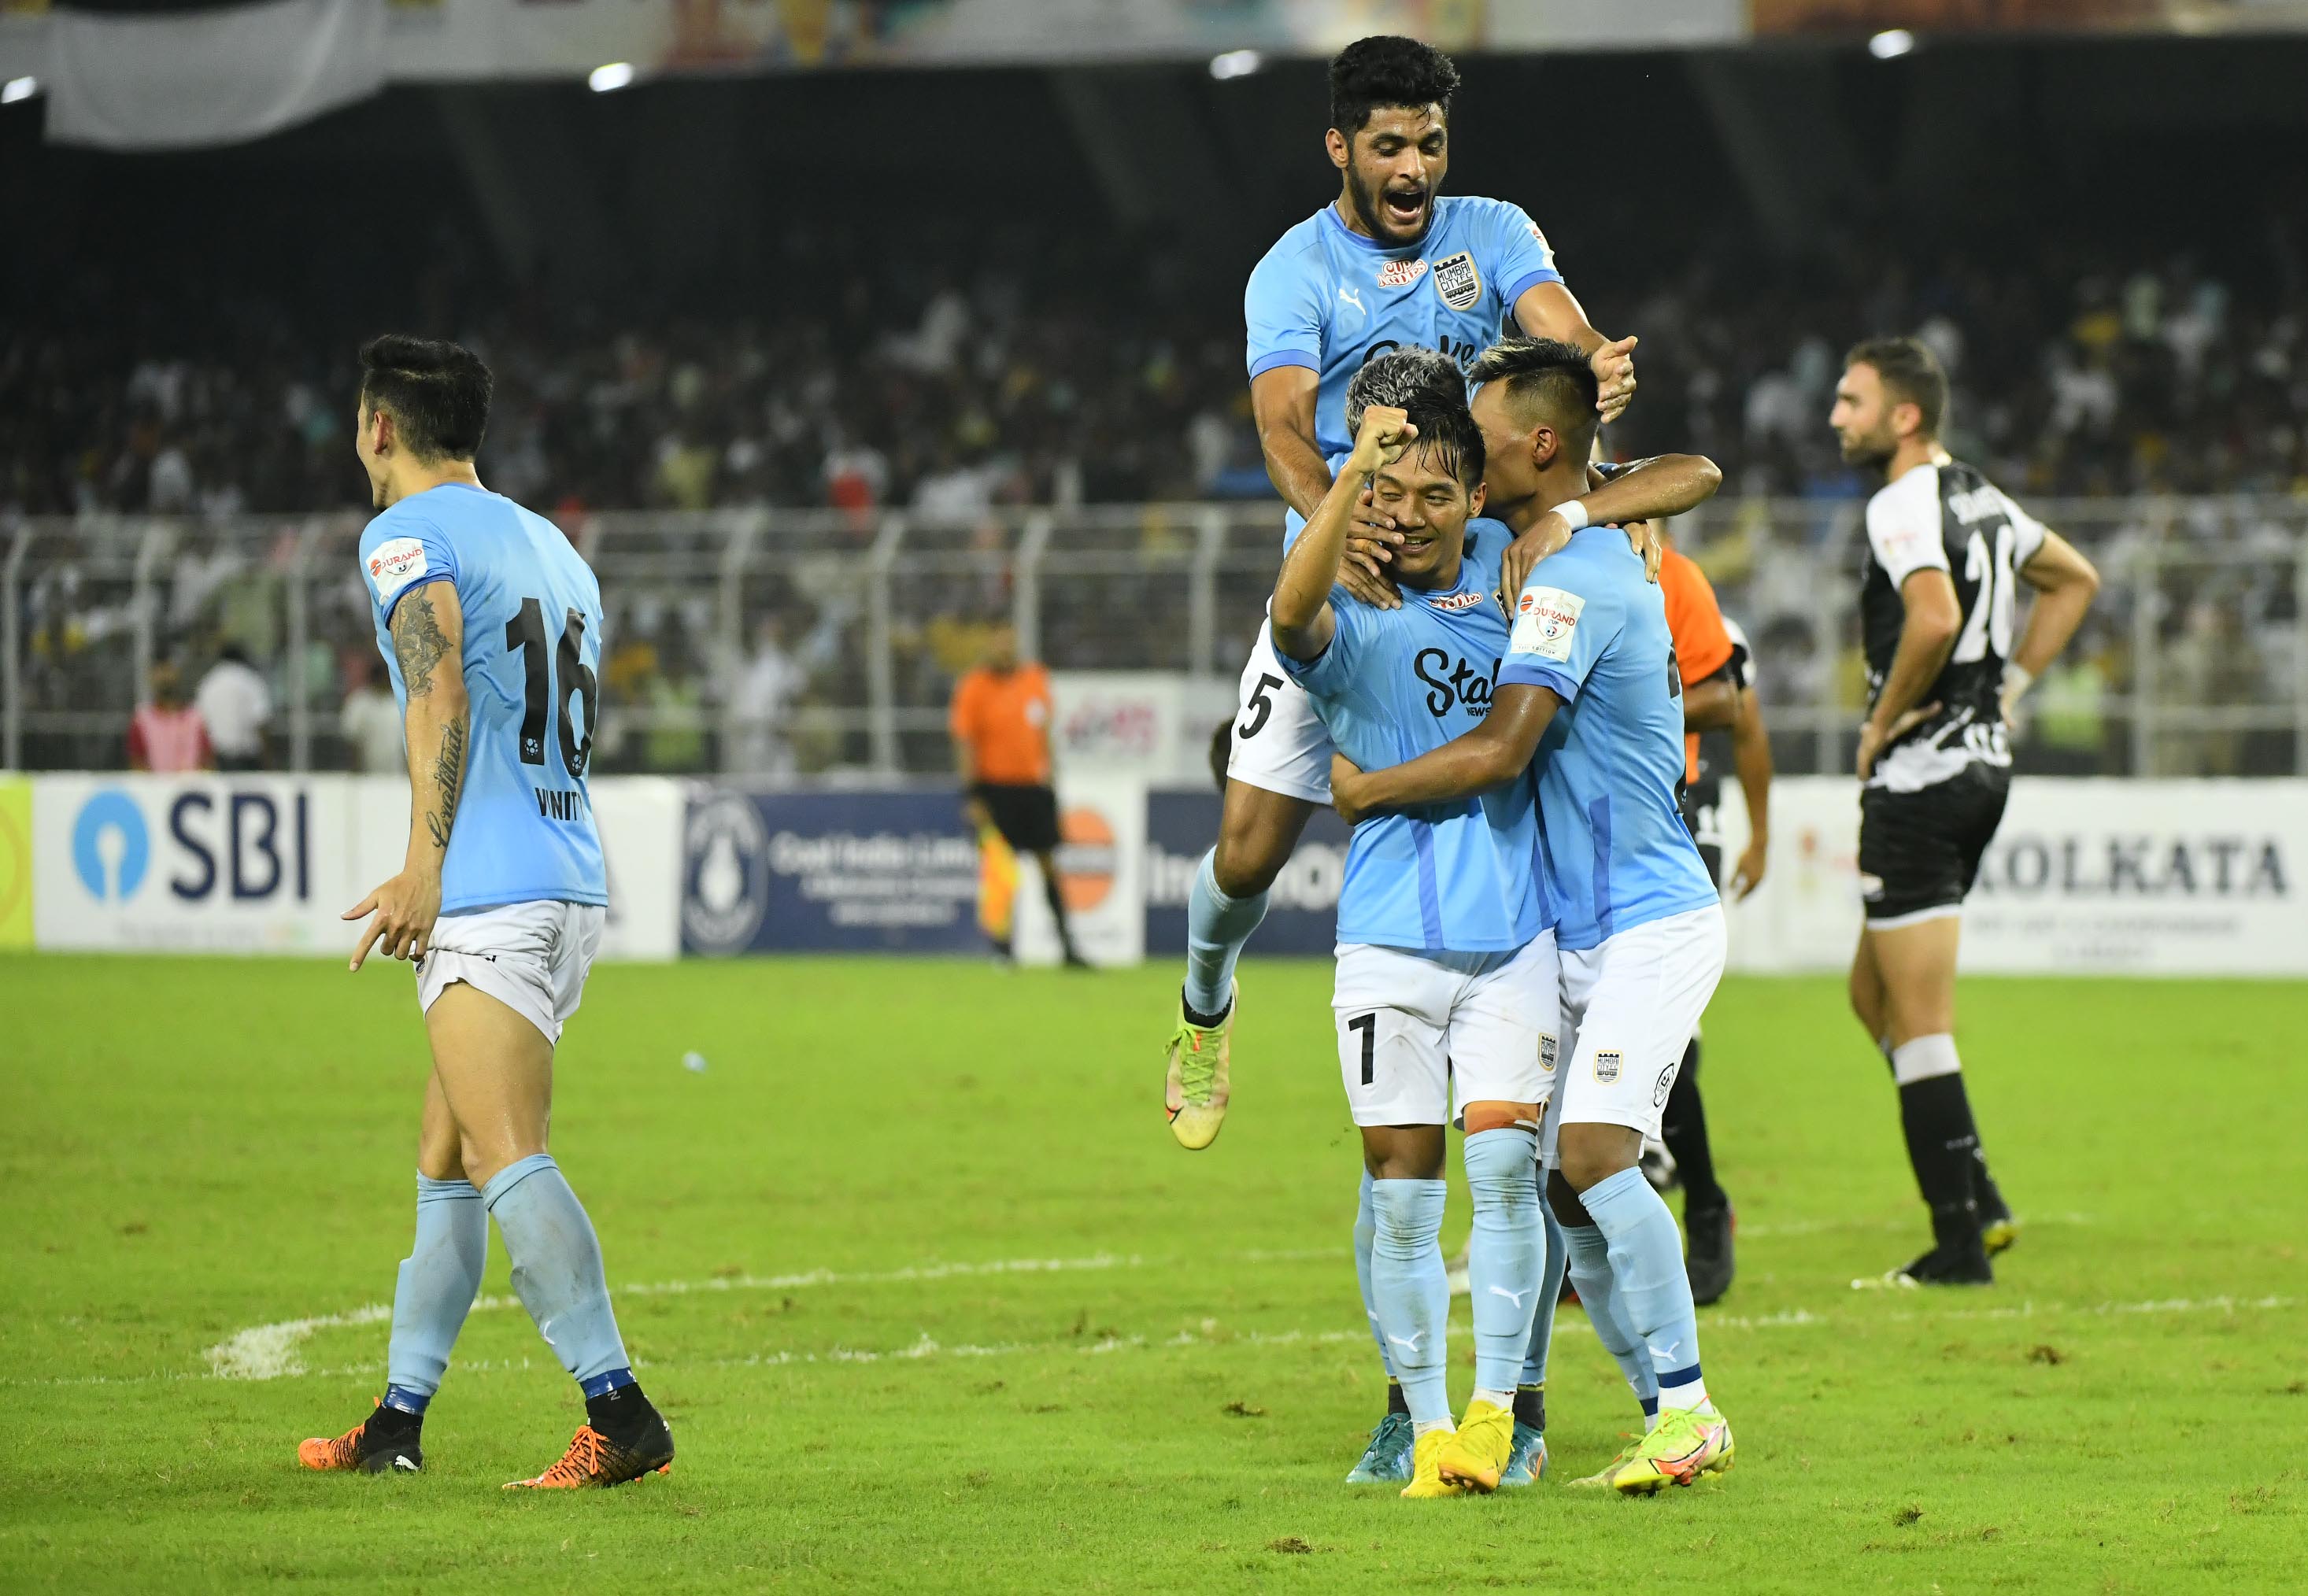 Durand Cup 2022 Highlights: Mumbai City FC Seals spot in FINALS, Bipin Singh scores in DYING minutes to SINK Mohammedan SC - Follow Highlights